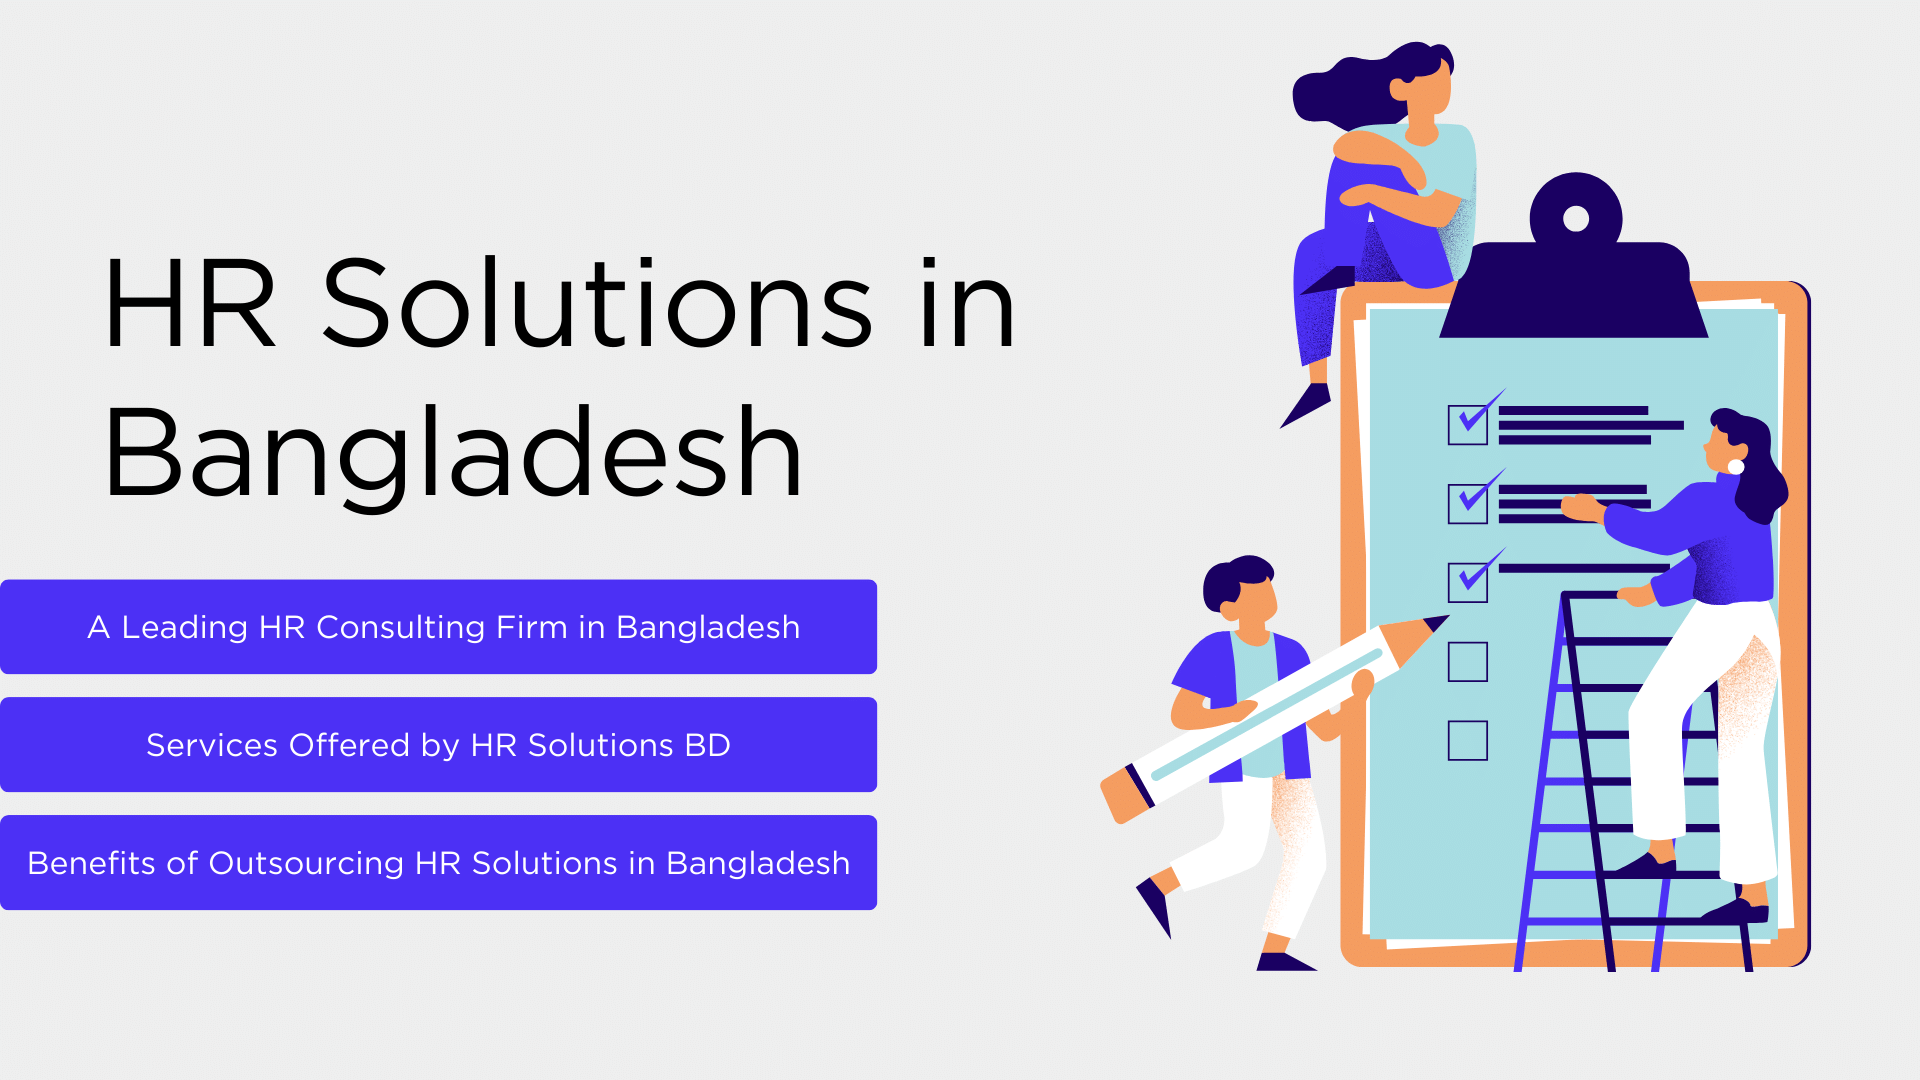 HR Solutions in Bangladesh